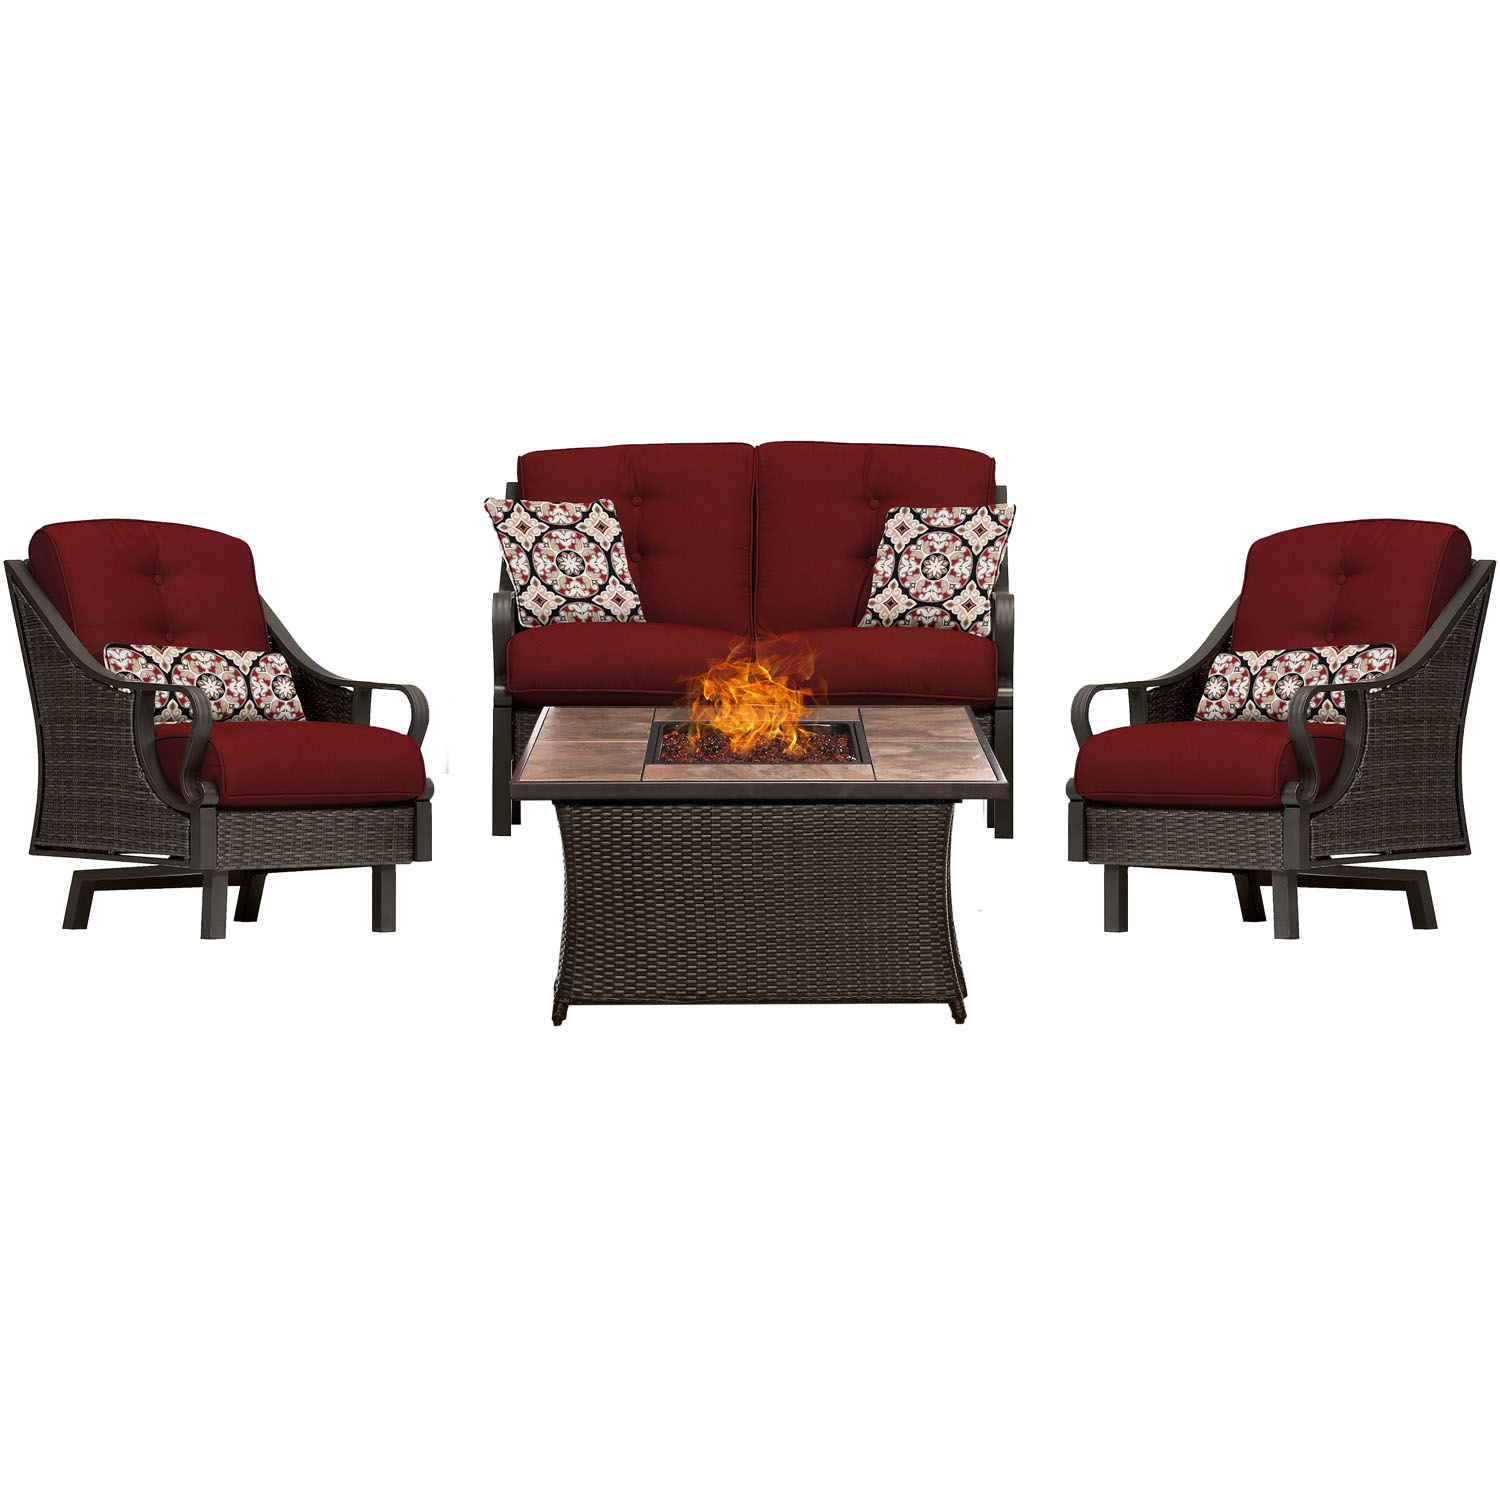 Hanover Ventura 4 Pcs Wicker and Steel Propane Fire Pit Chat Set, Crimson Red - image 1 of 11